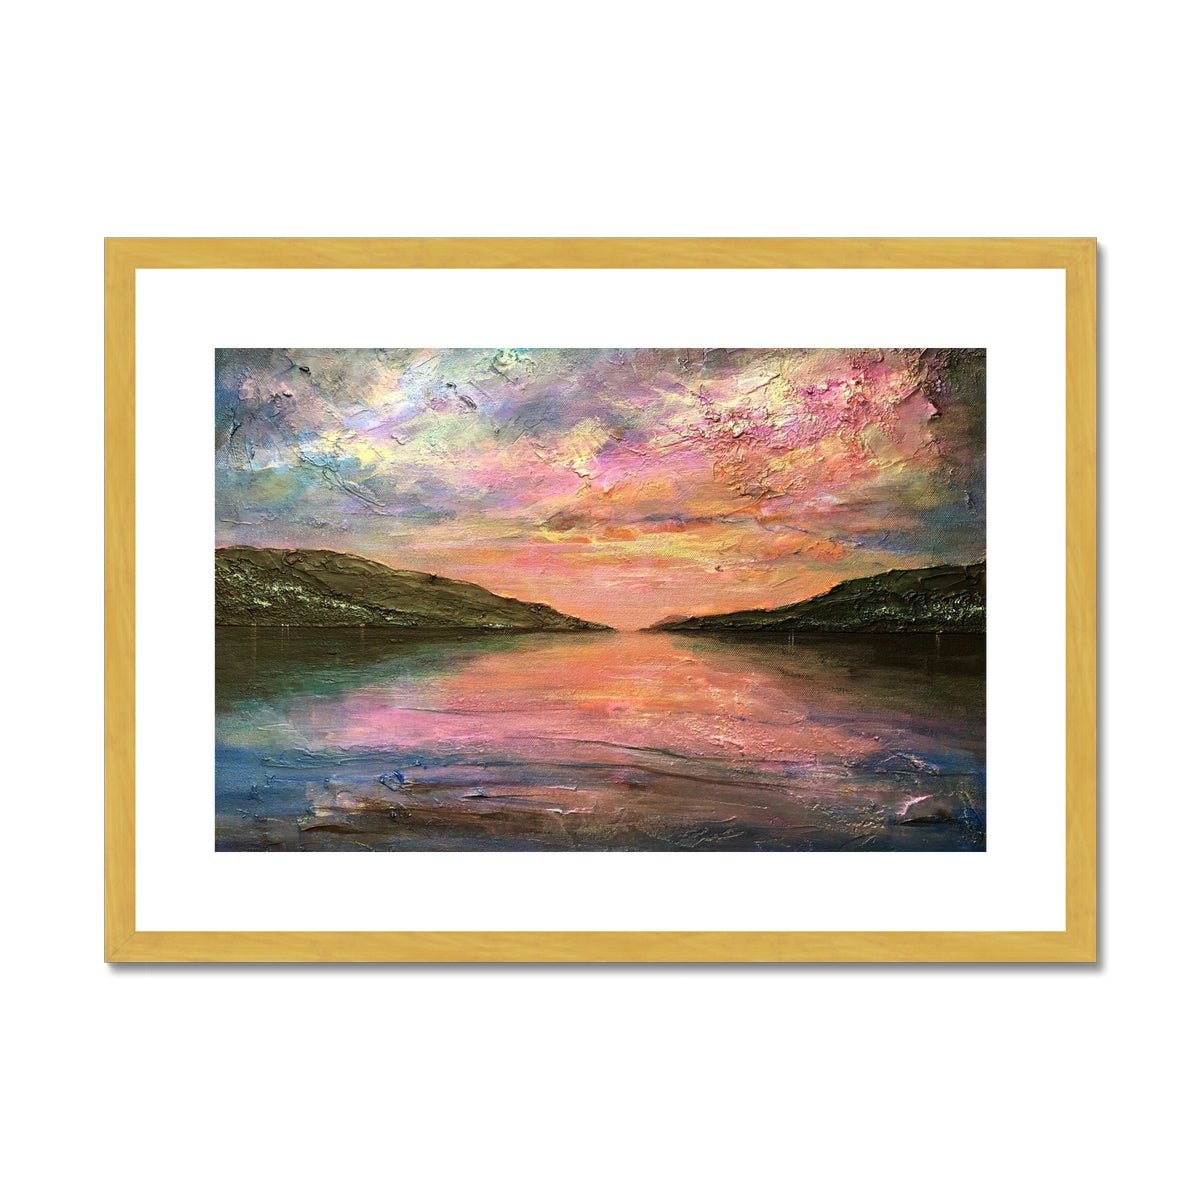 Loch Ness Dawn Painting | Antique Framed & Mounted Prints From Scotland-Antique Framed & Mounted Prints-Scottish Lochs & Mountains Art Gallery-A2 Landscape-Gold Frame-Paintings, Prints, Homeware, Art Gifts From Scotland By Scottish Artist Kevin Hunter